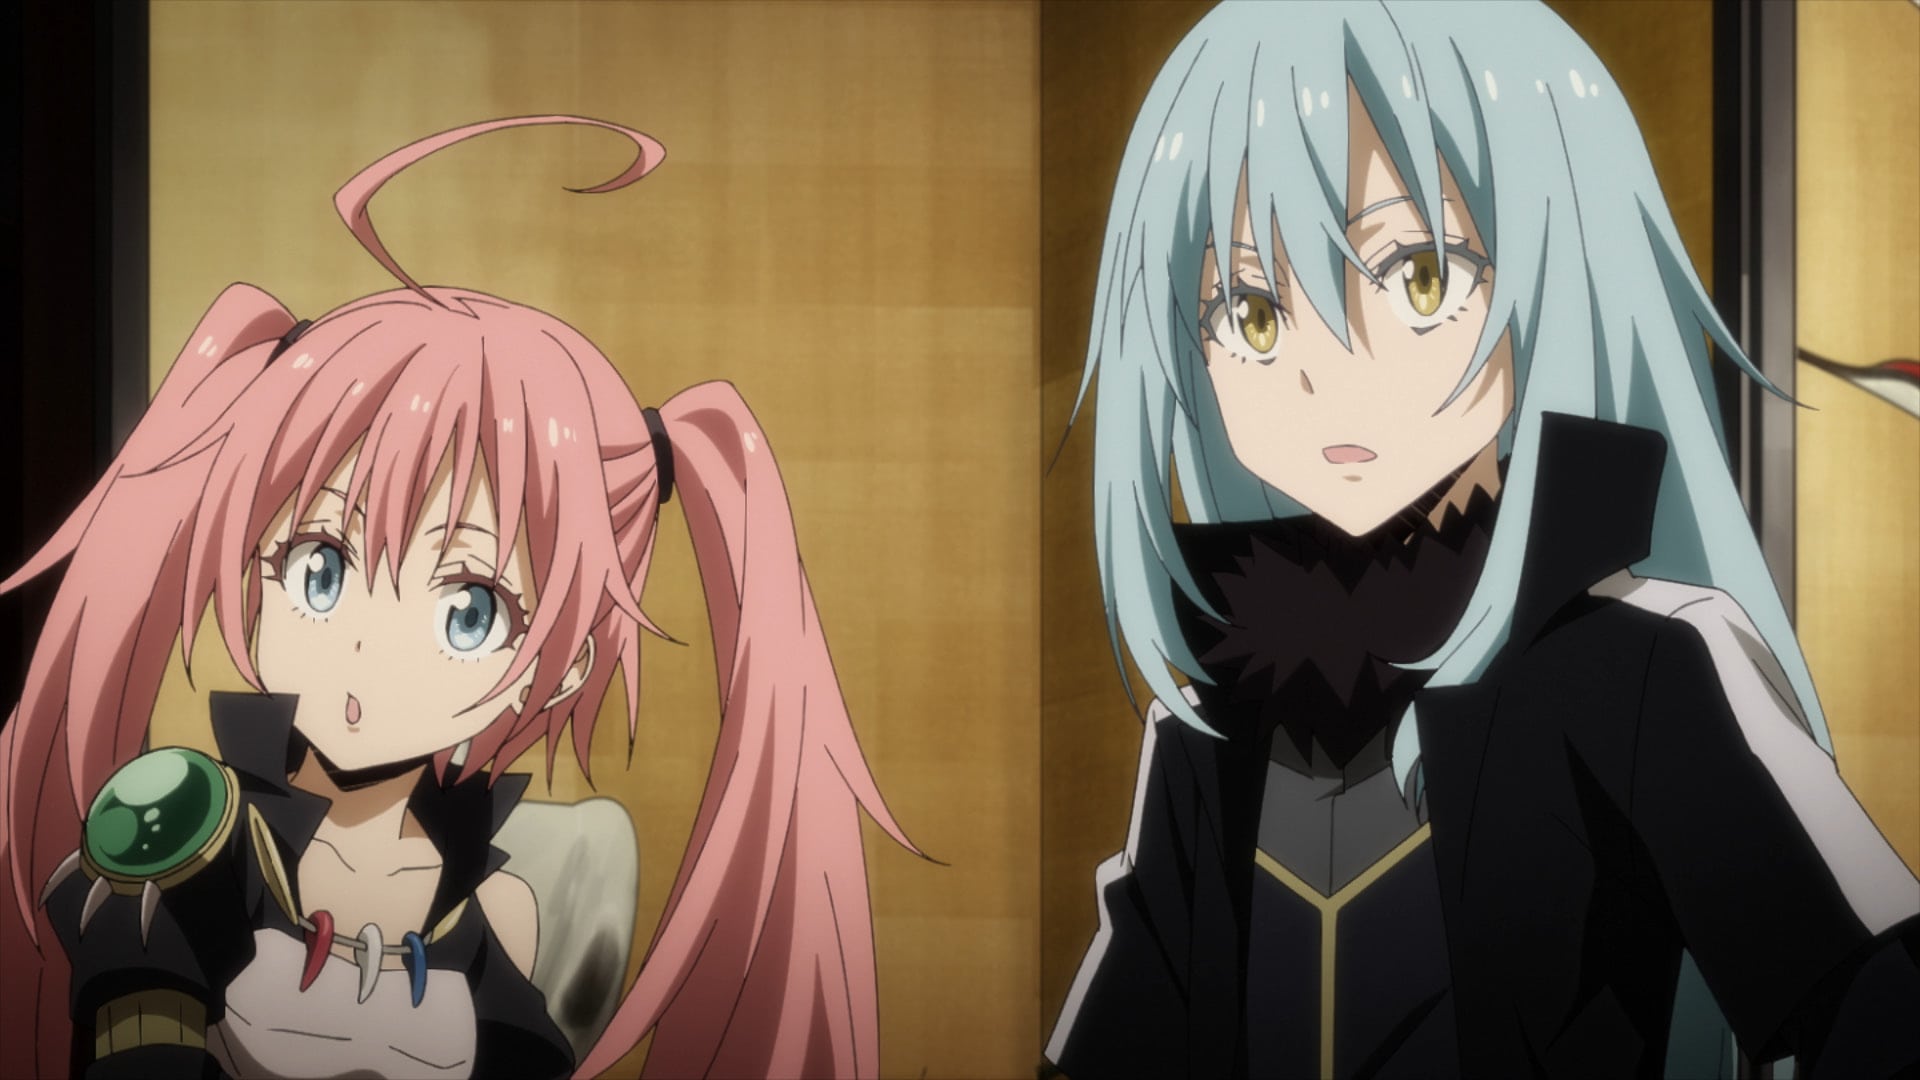 That Time I Got Reincarnated as a Slime: Scarlet Bond Opens in